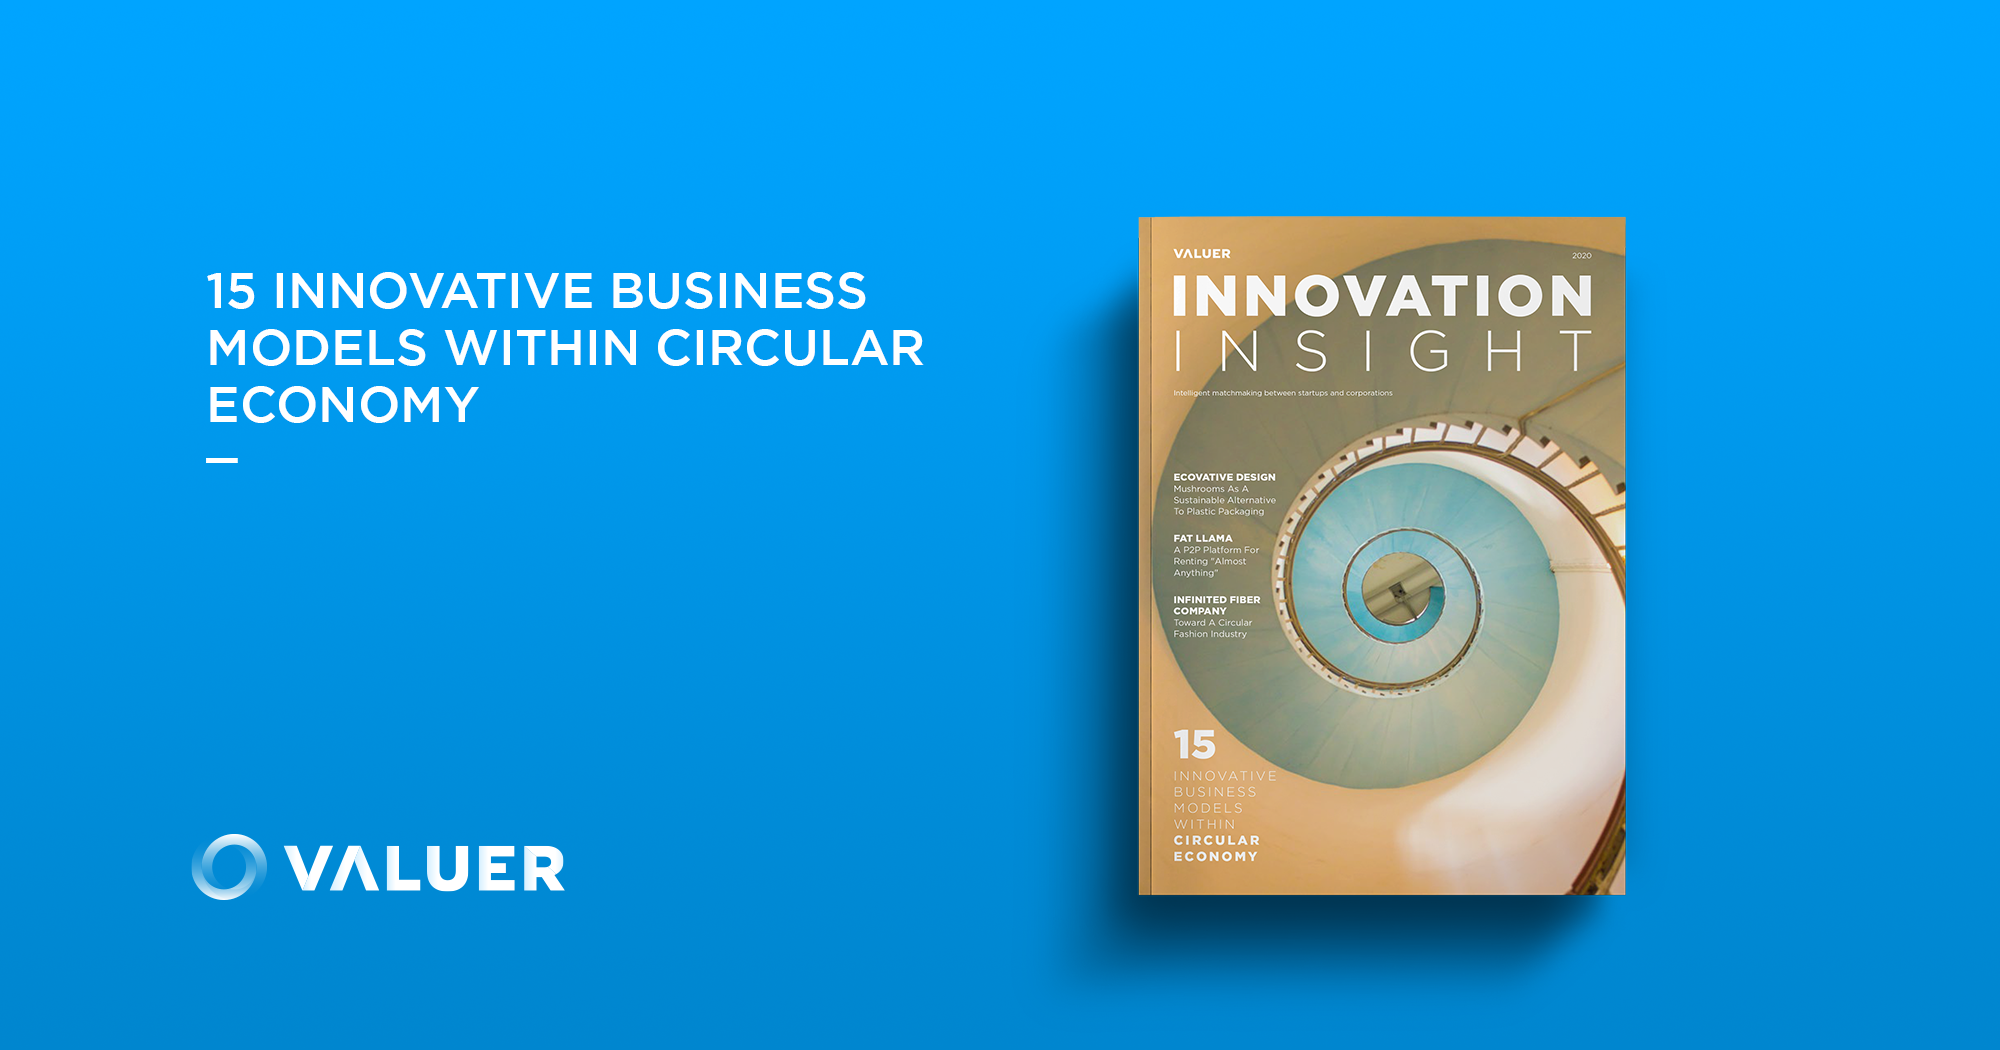 15 Innovation Business Models within the Circular Economy